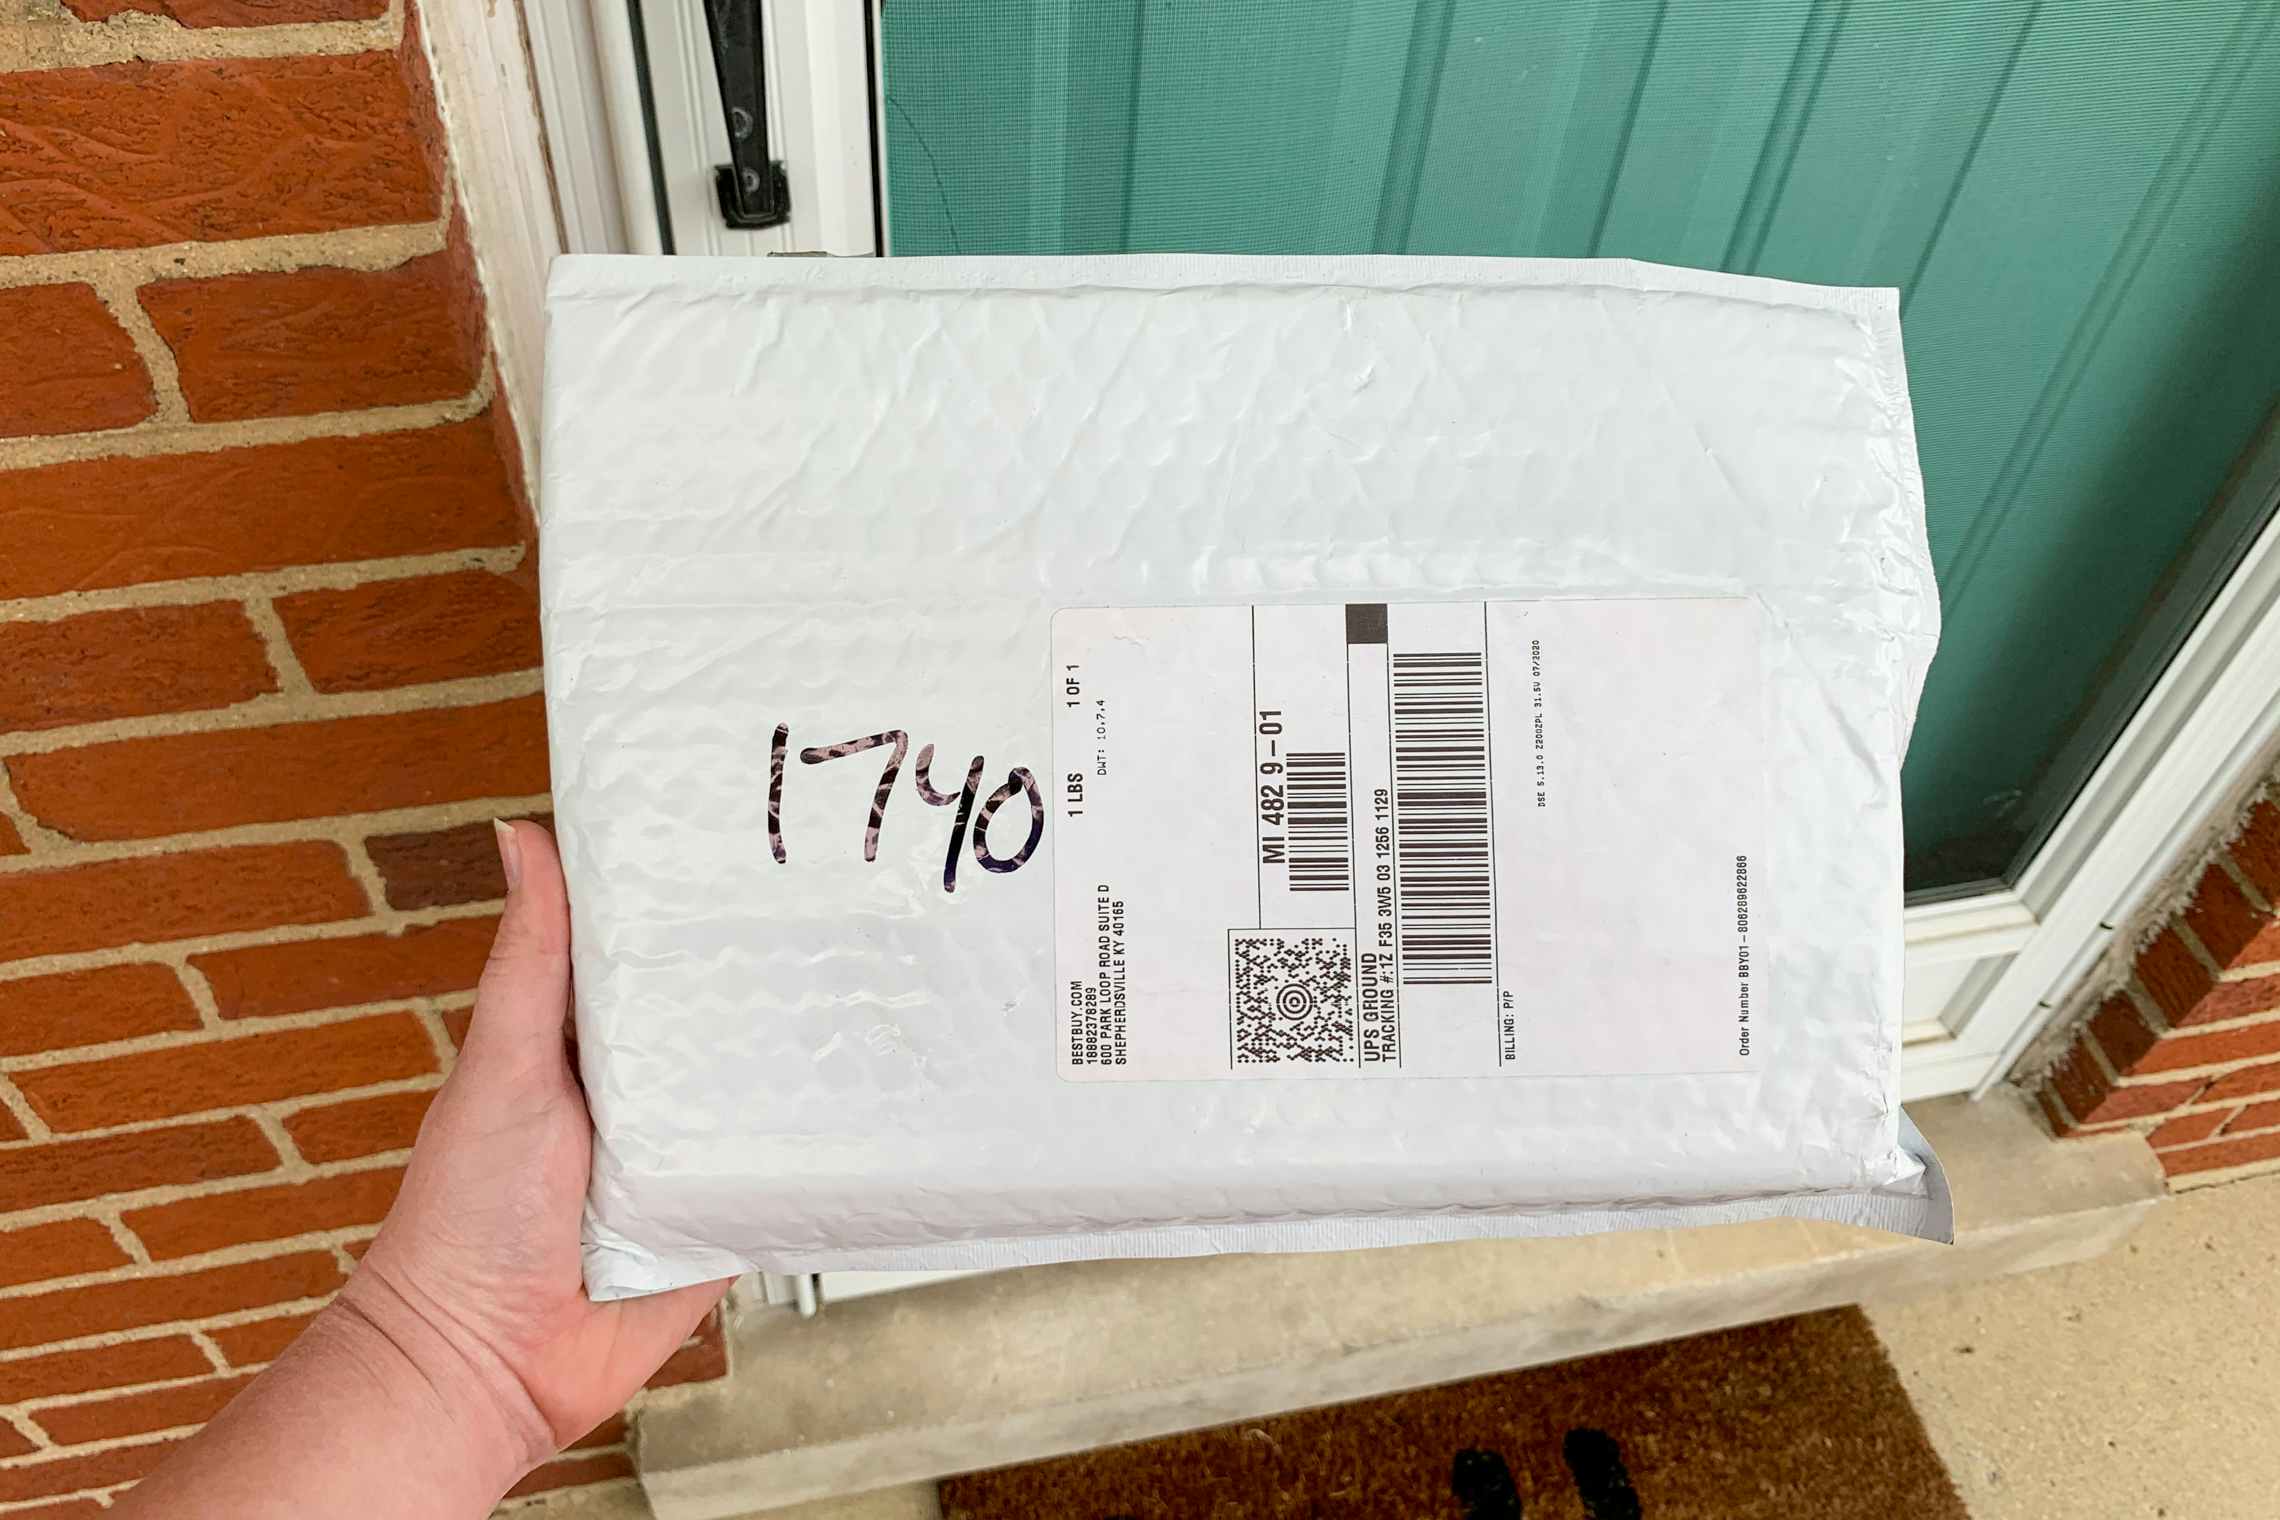 A best buy package at a front door.